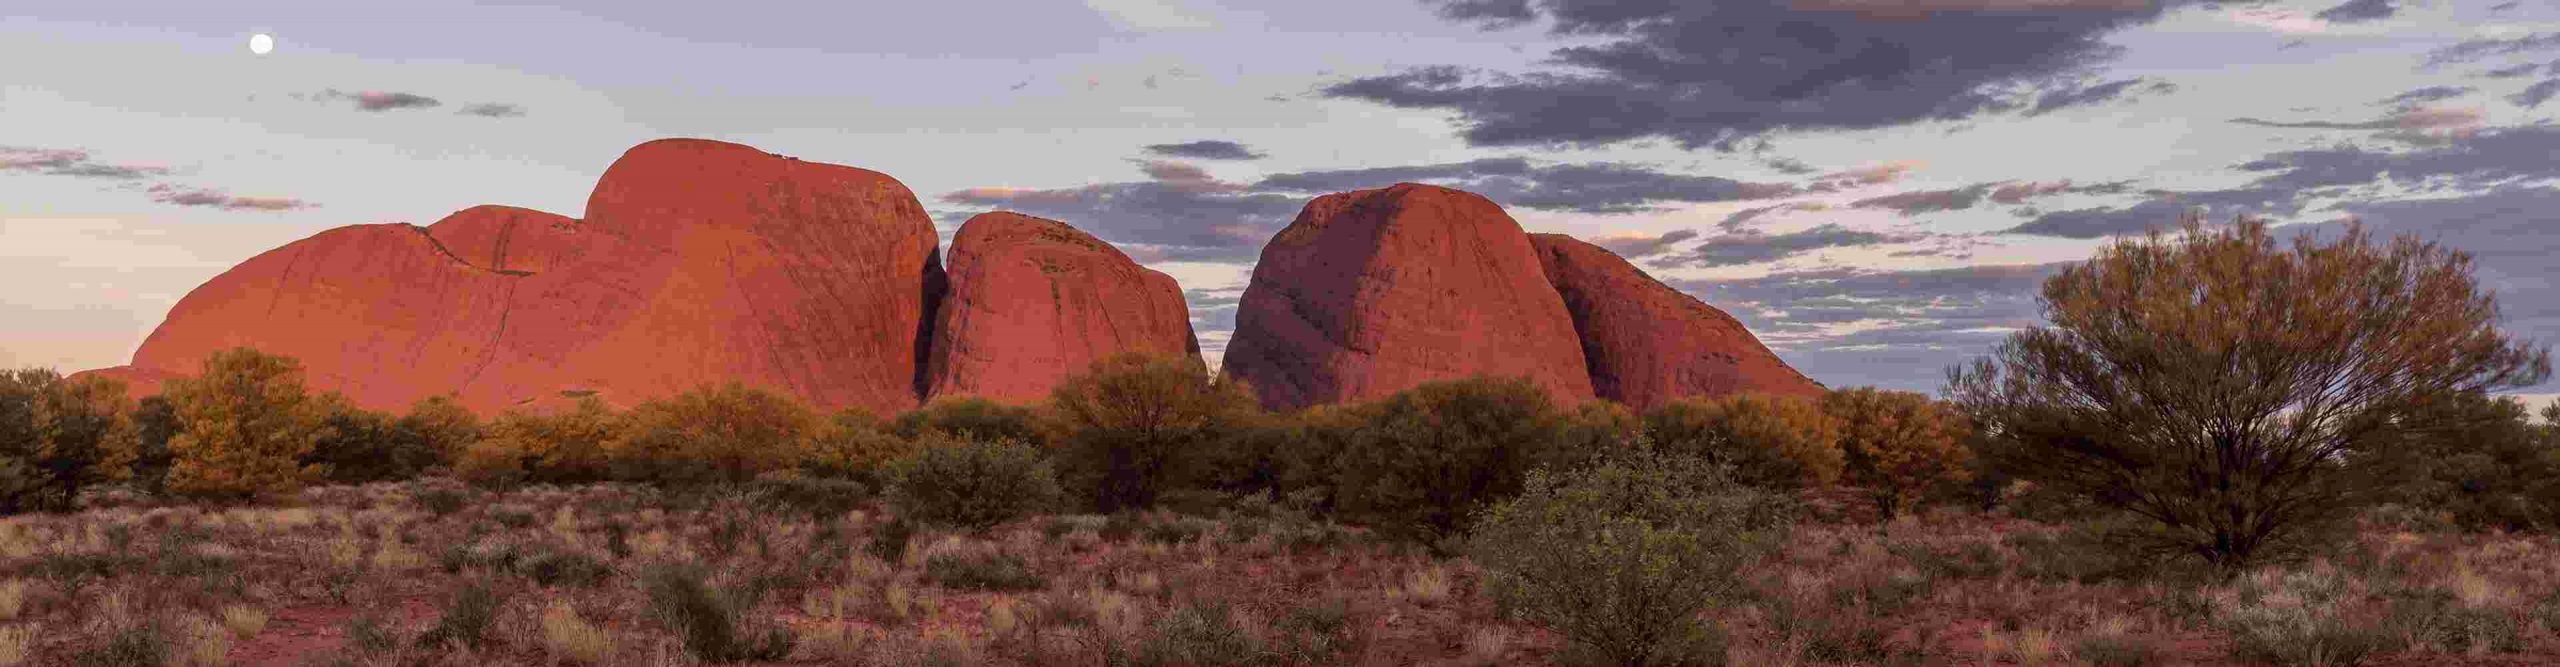 Kata Tjuta under a spectacular sky in the Northern Territory